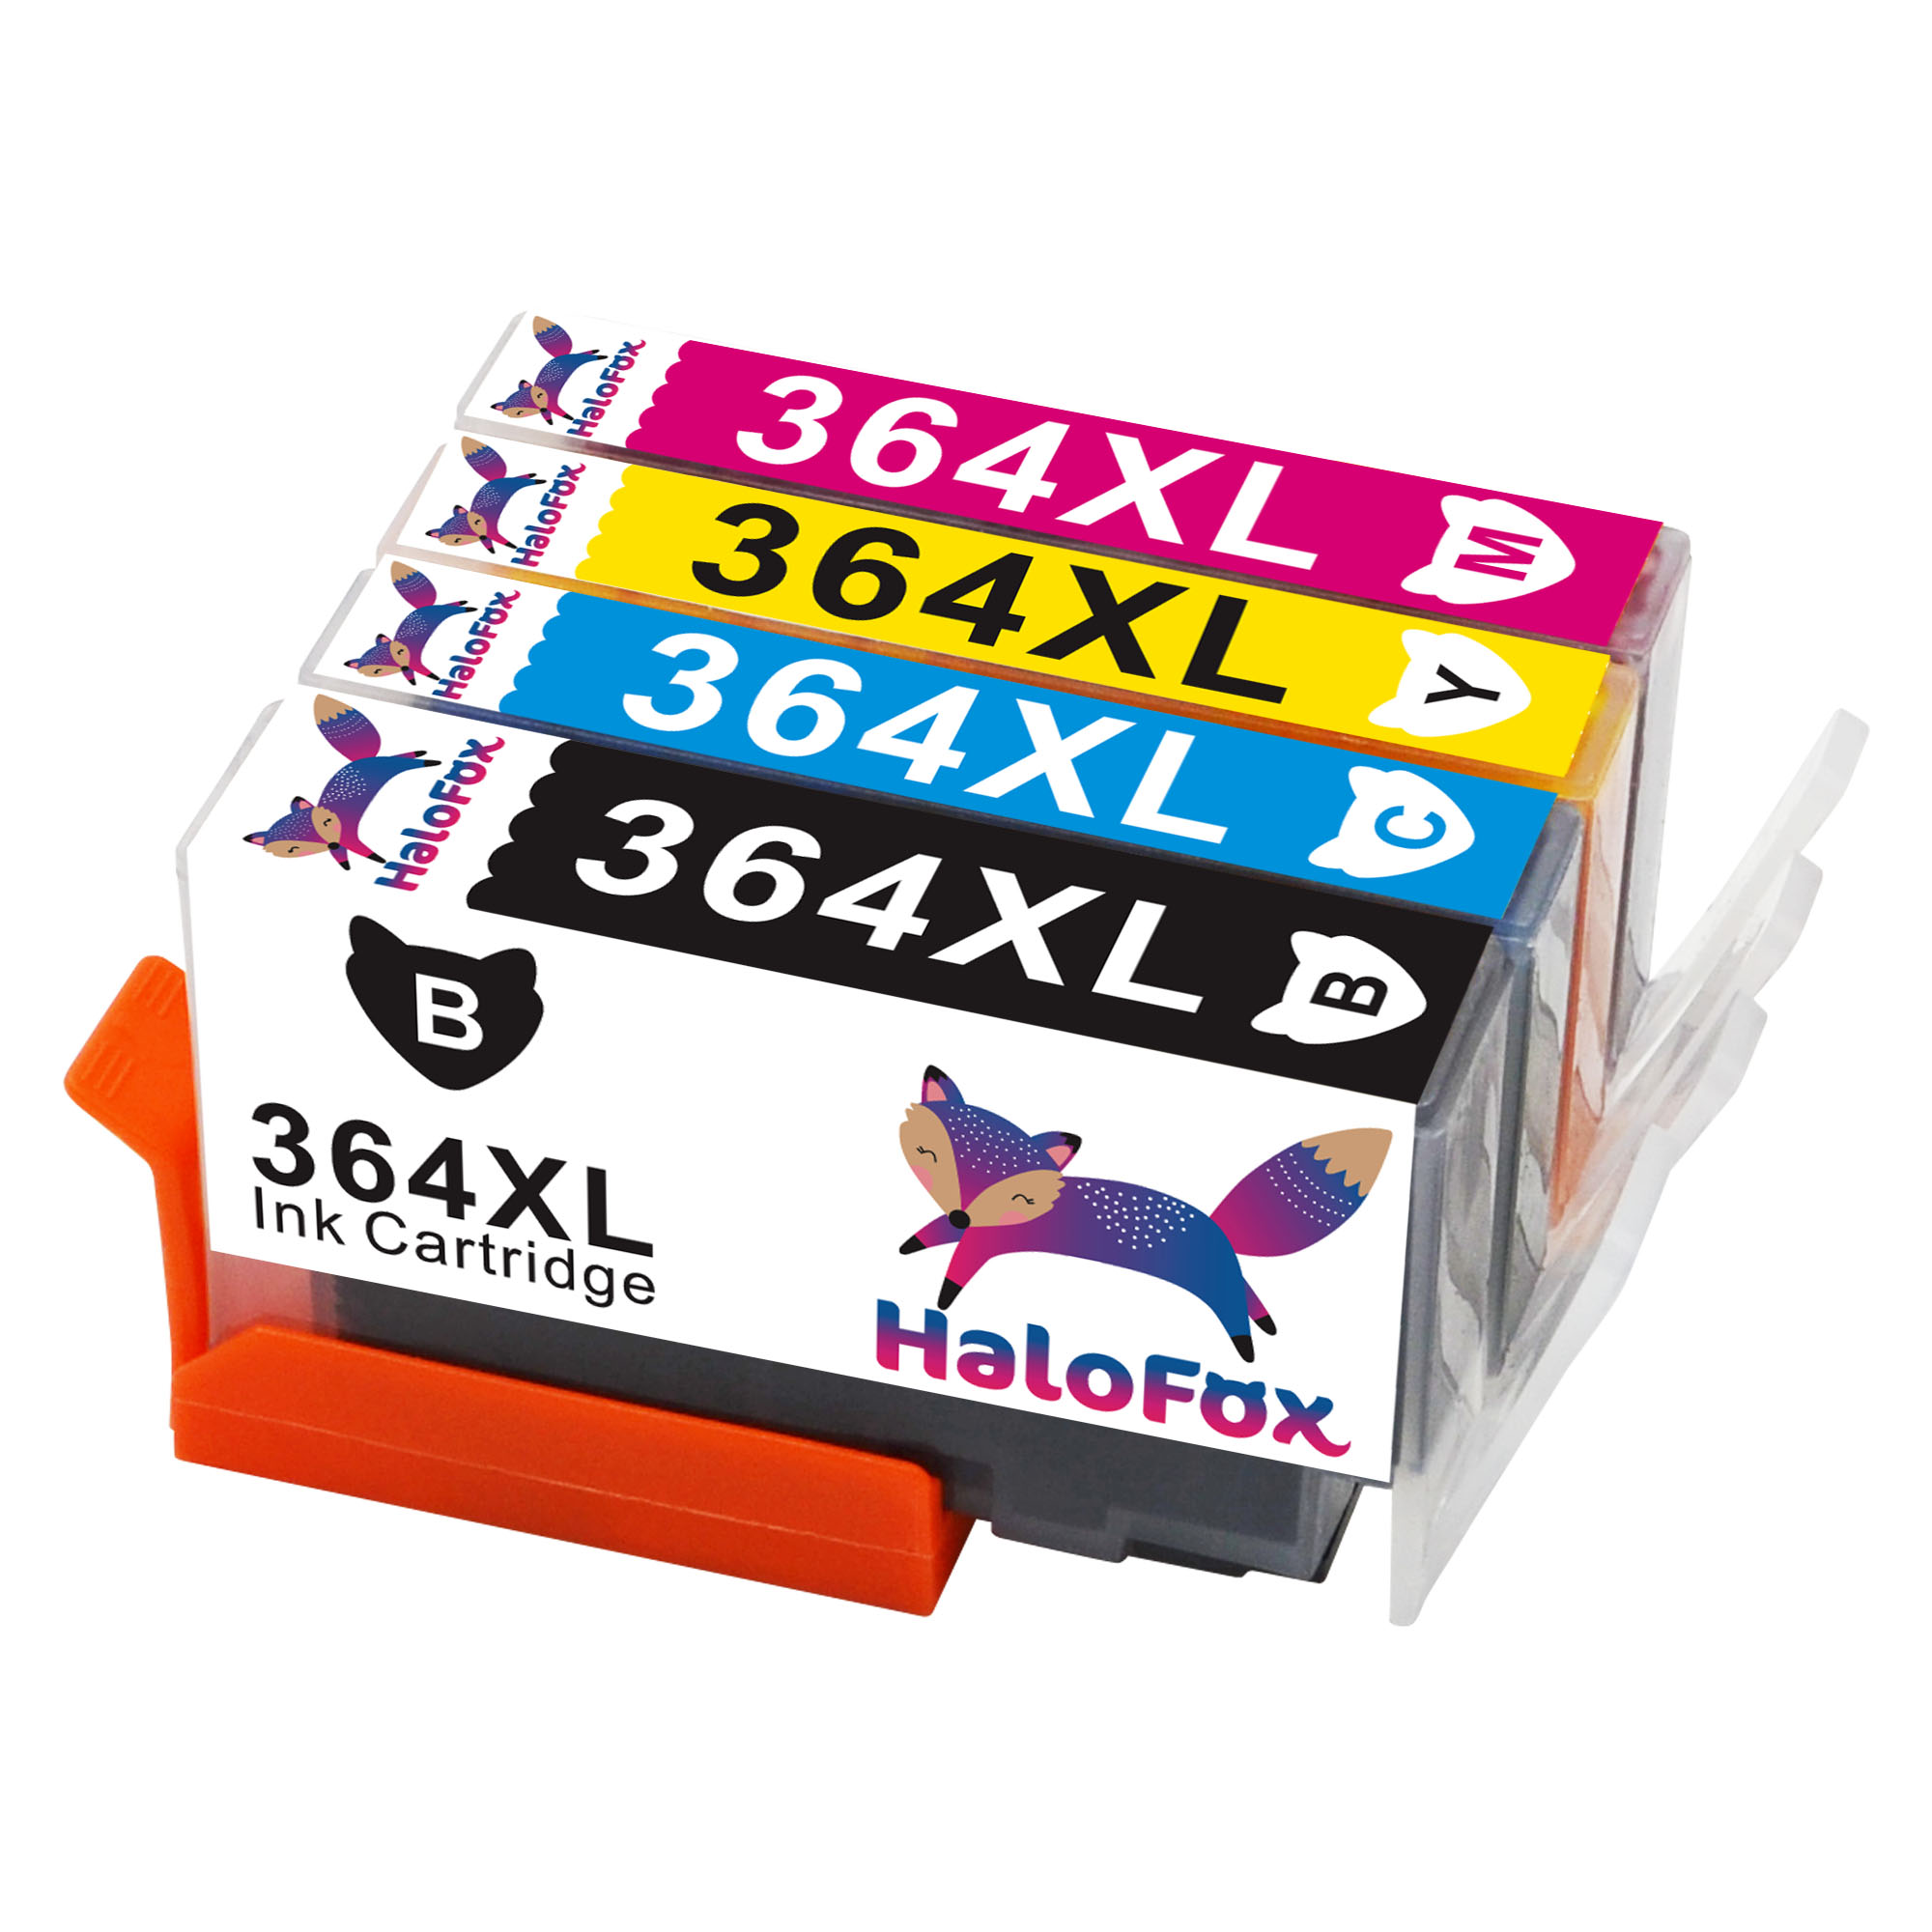 EU---HaloFox 4 Pack (Black?Cyan, Magenta, Yellow) High Yield Replacememt For HP 364XL 364 XL Ink Cartridges Compatible For HP 5510 5520 5524 6510 6520 7510 7520 Printer